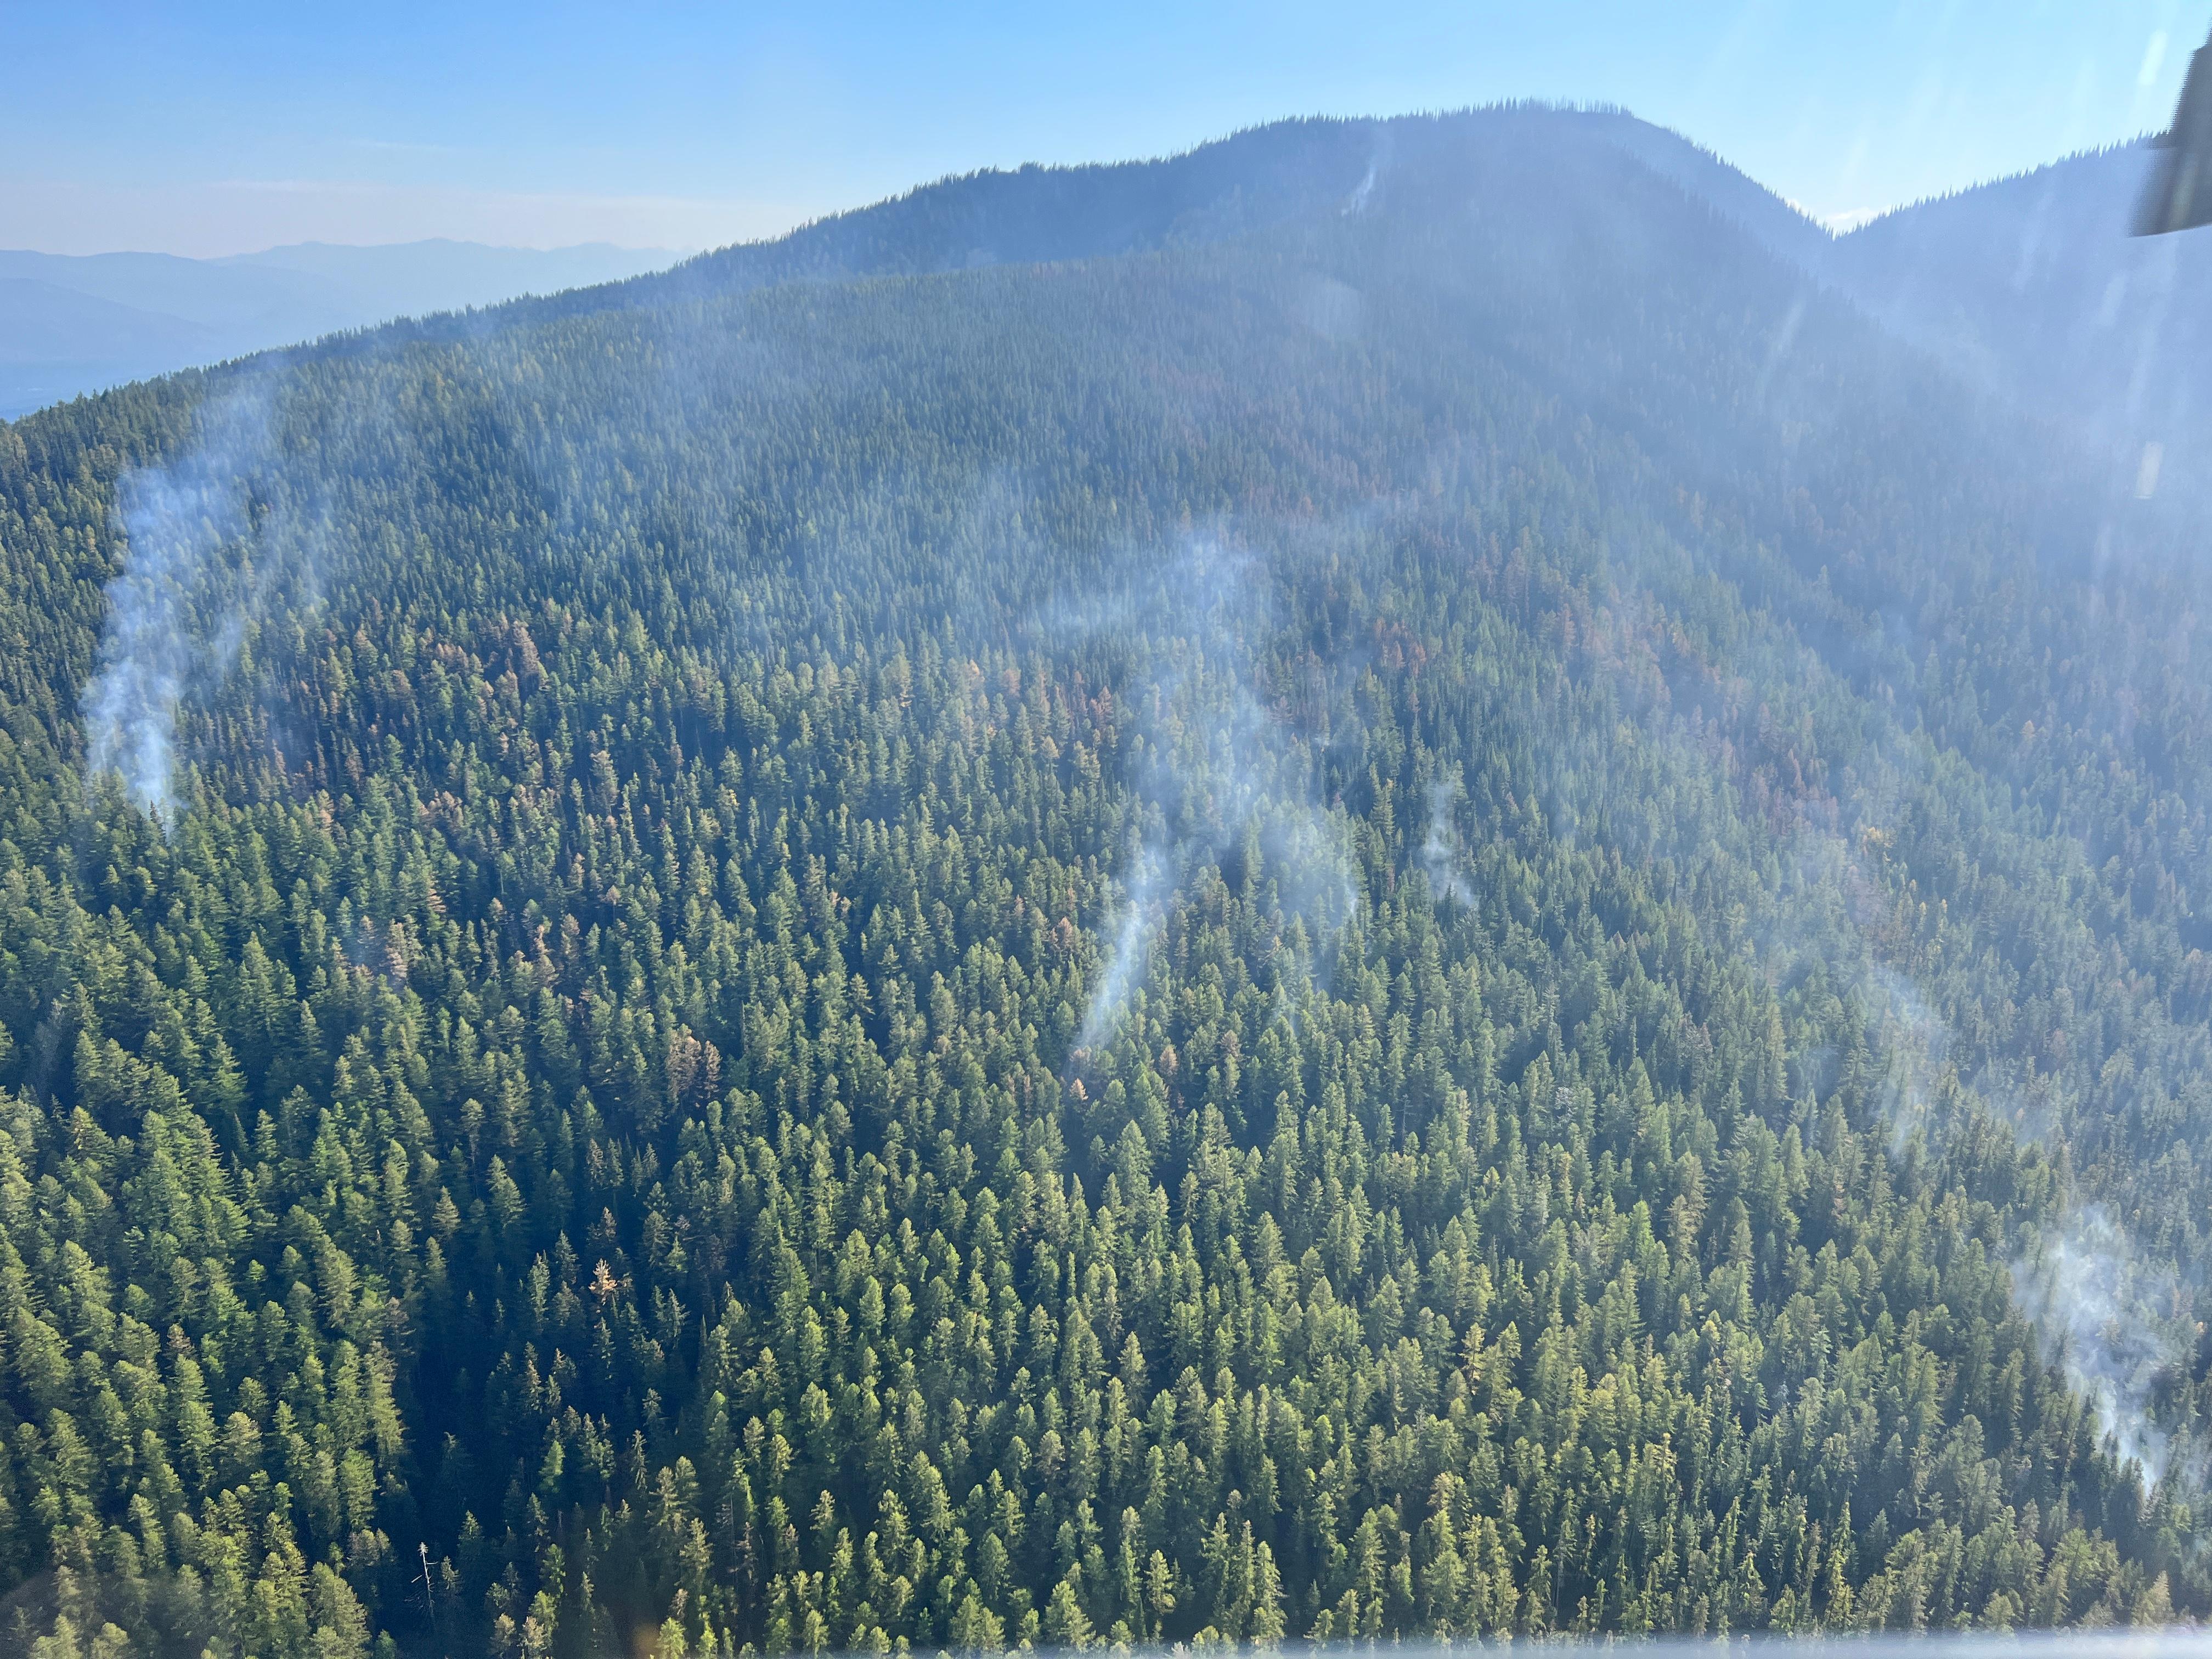 The Katka Fire showed minimal fire activity on October 2.